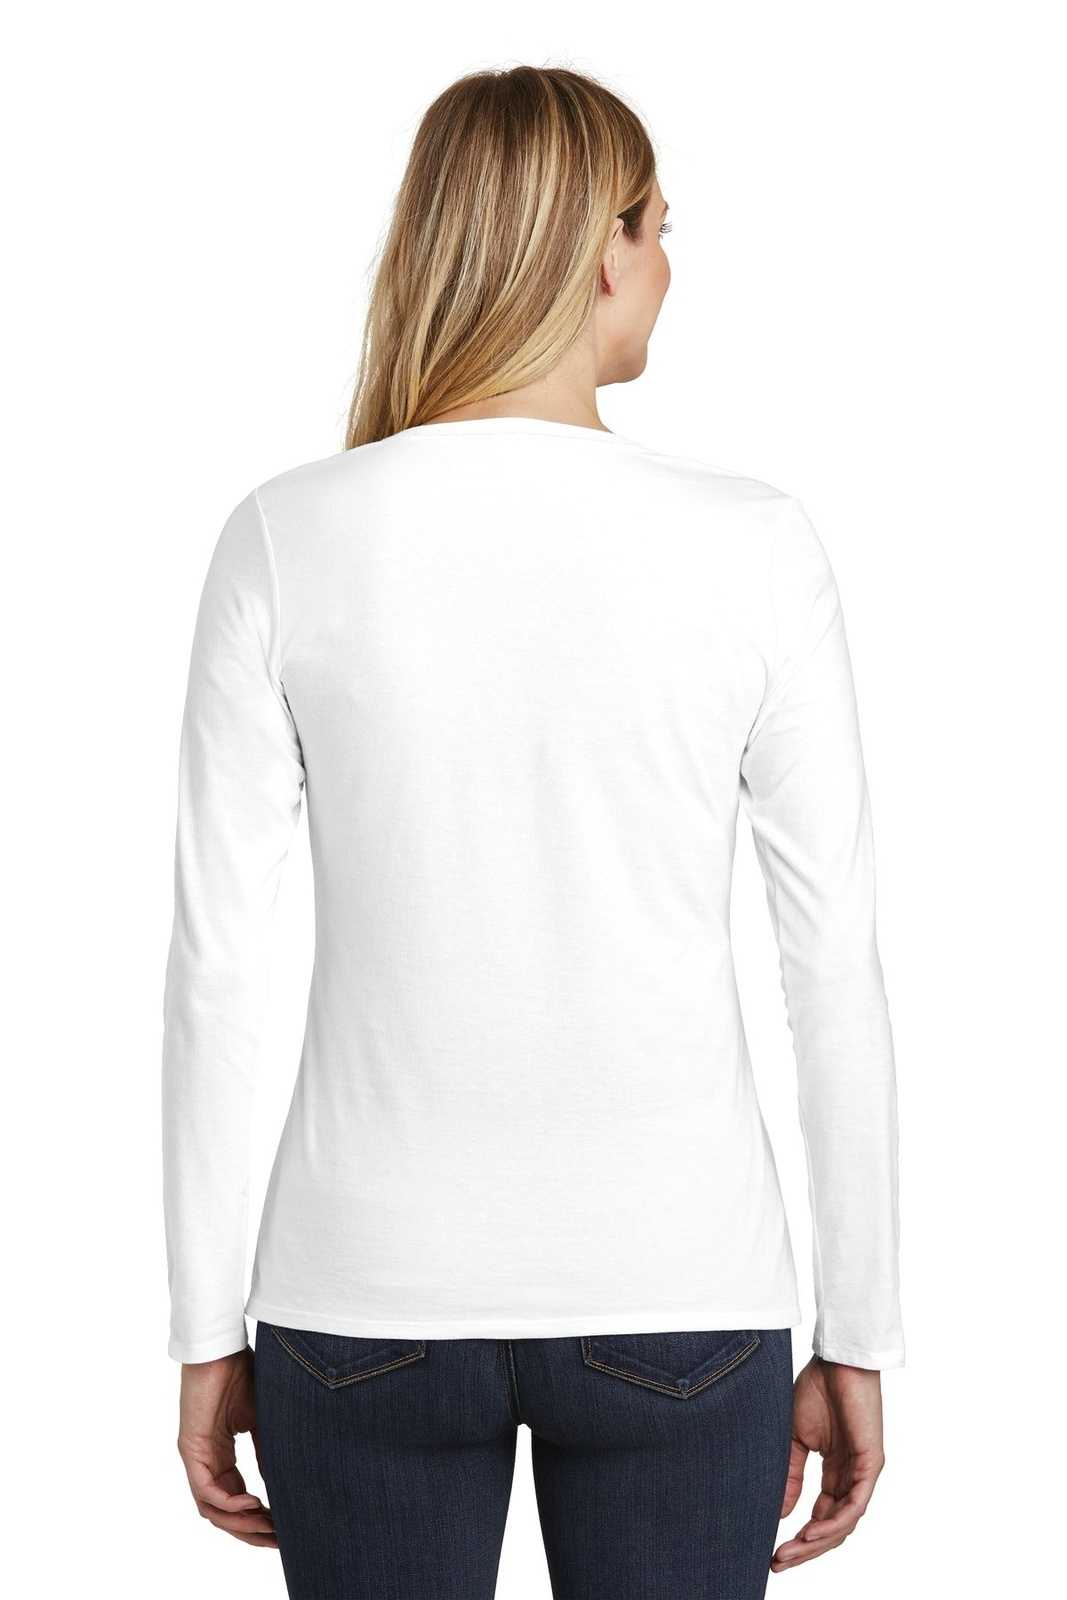 District DT6201 Women's Very Important Tee Long Sleeve V-Neck - White - HIT a Double - 1